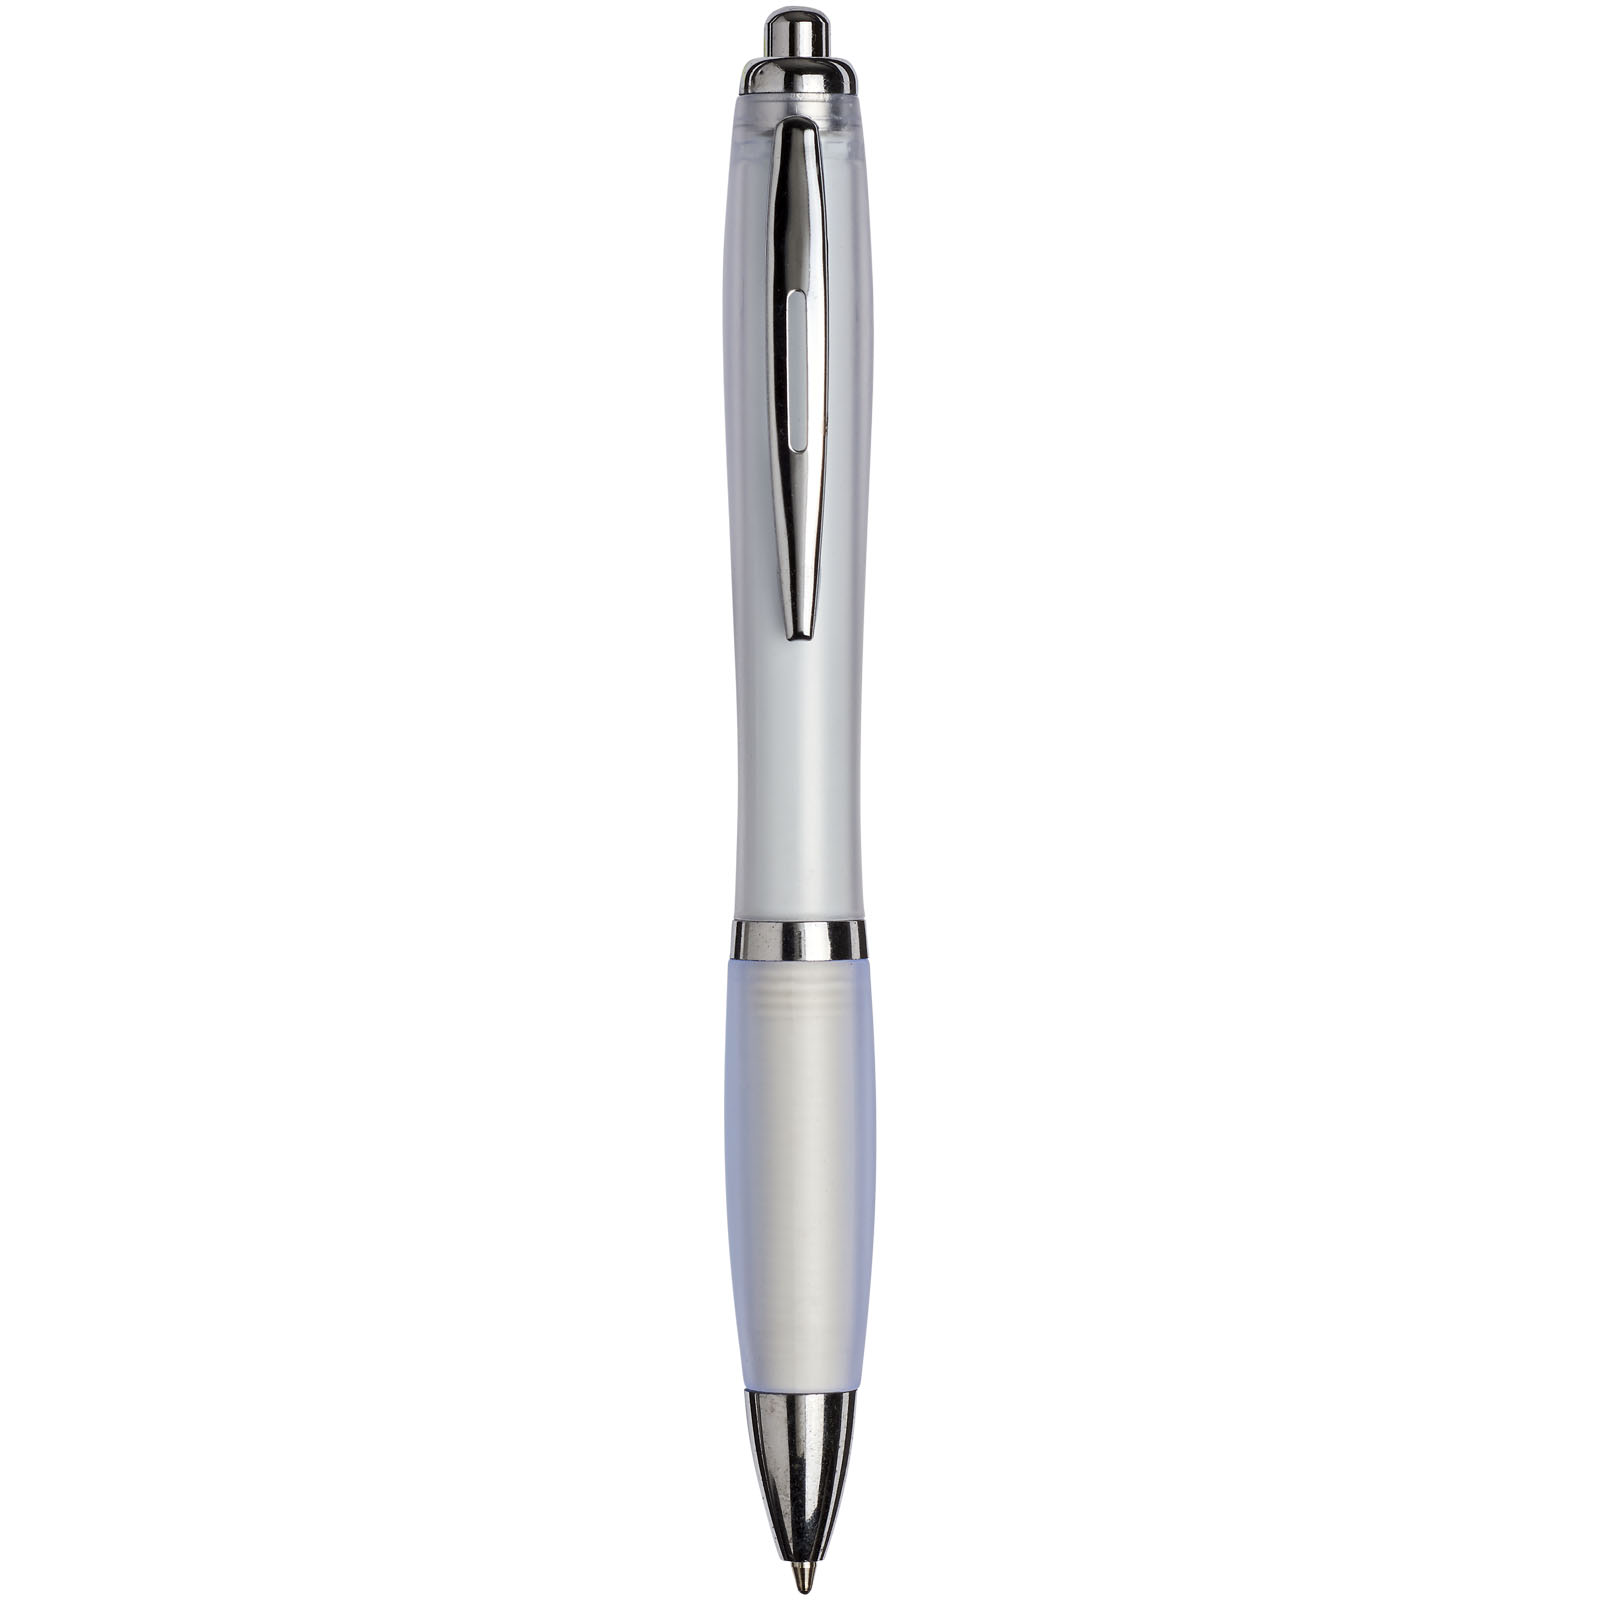 Advertising Ballpoint Pens - Curvy ballpoint pen with frosted barrel and grip